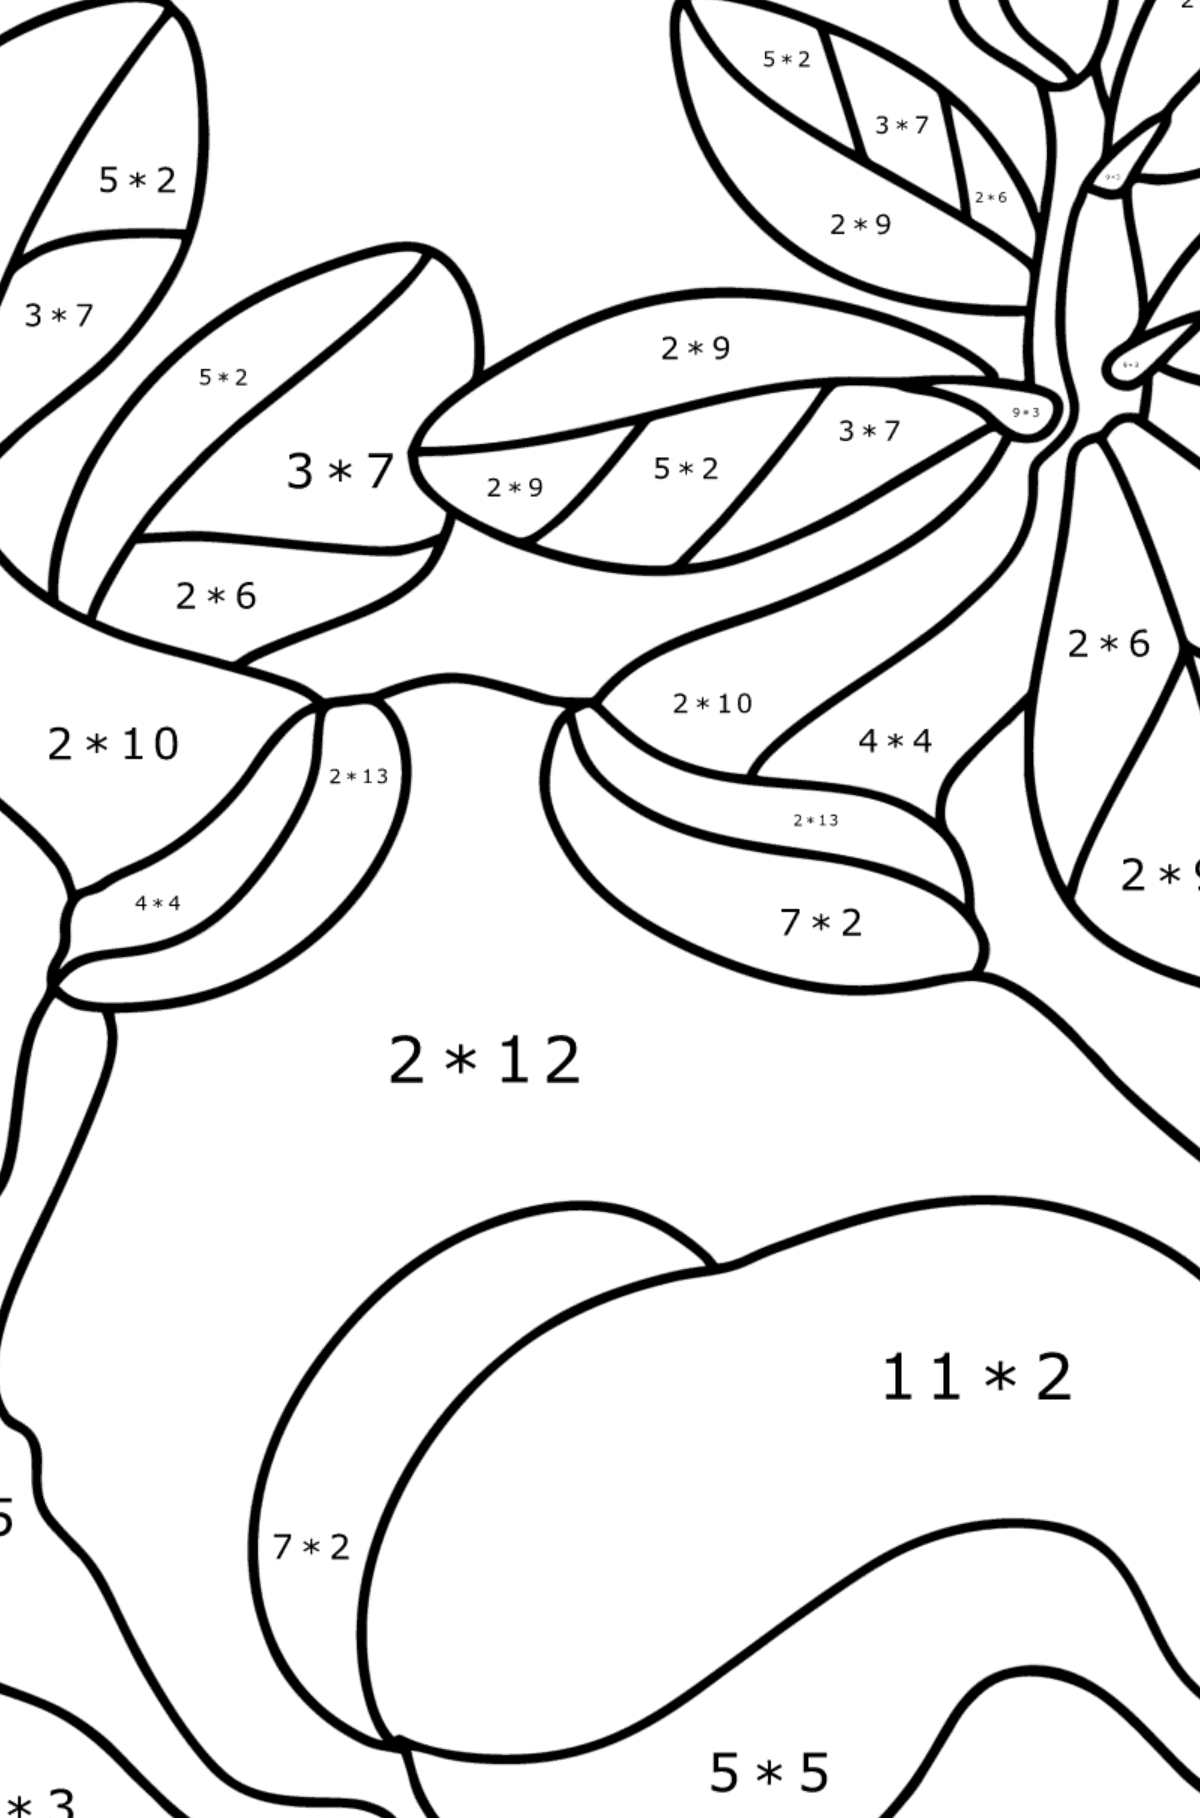 Adenium coloring page - Math Coloring - Multiplication for Kids